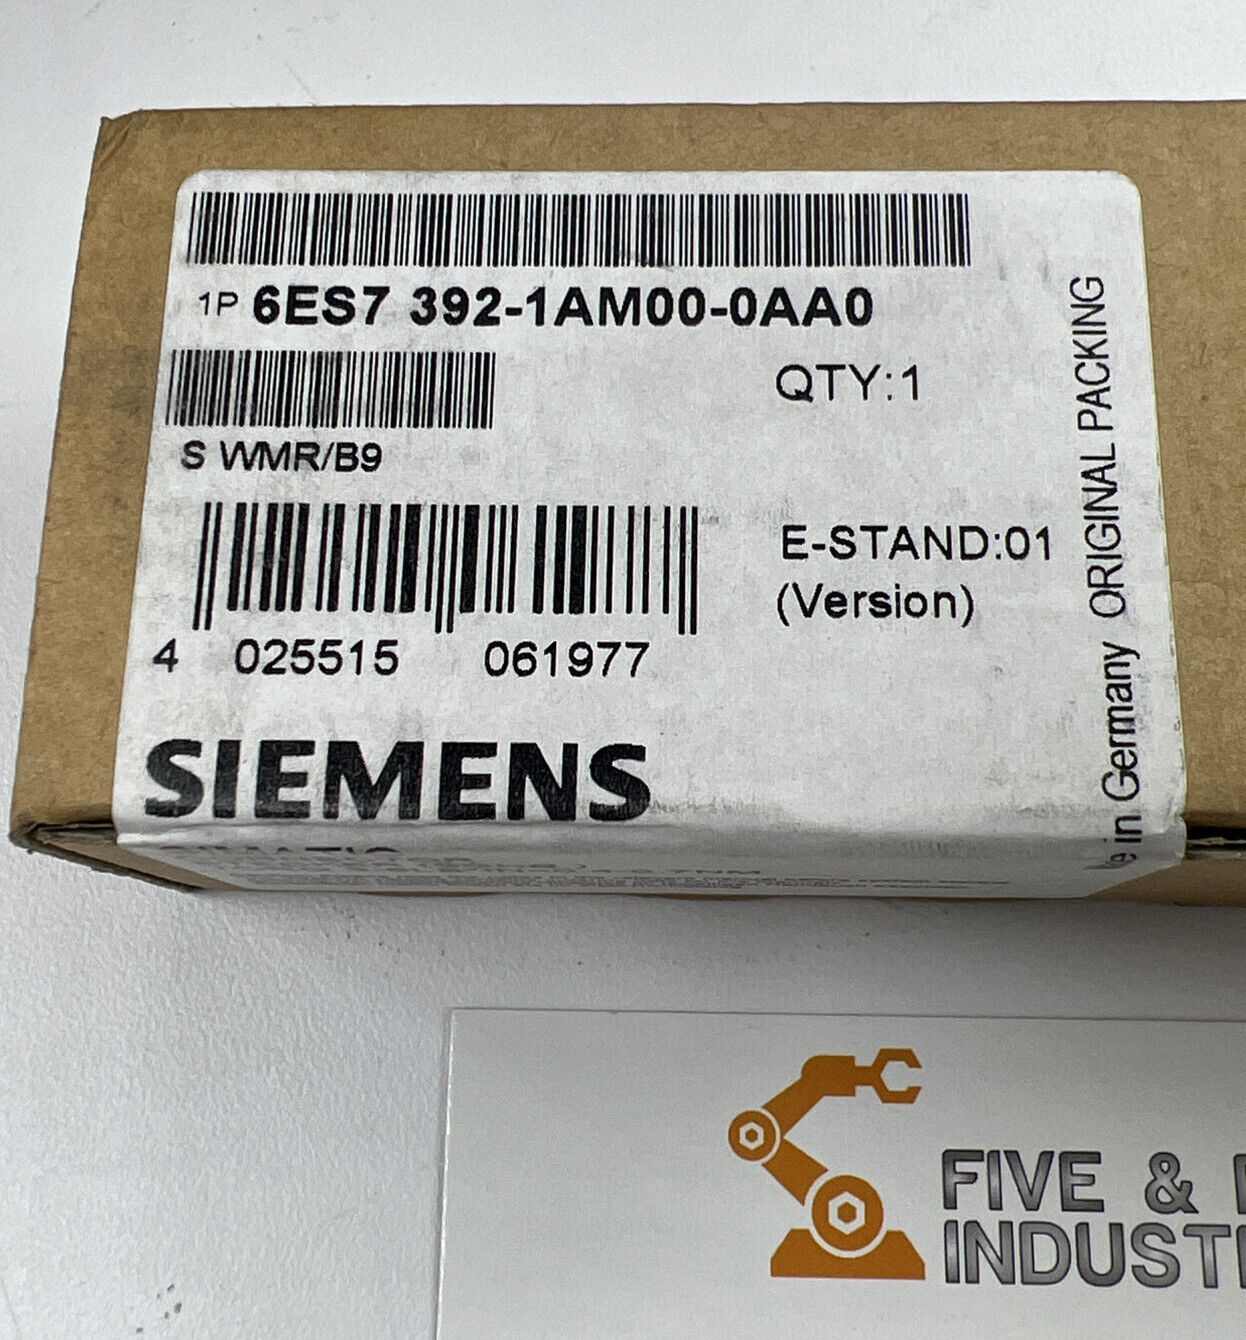 Siemens 6ES7 392-1AM00-0AA0 Brand New Sealed Simatic Connector (RE245) - 0